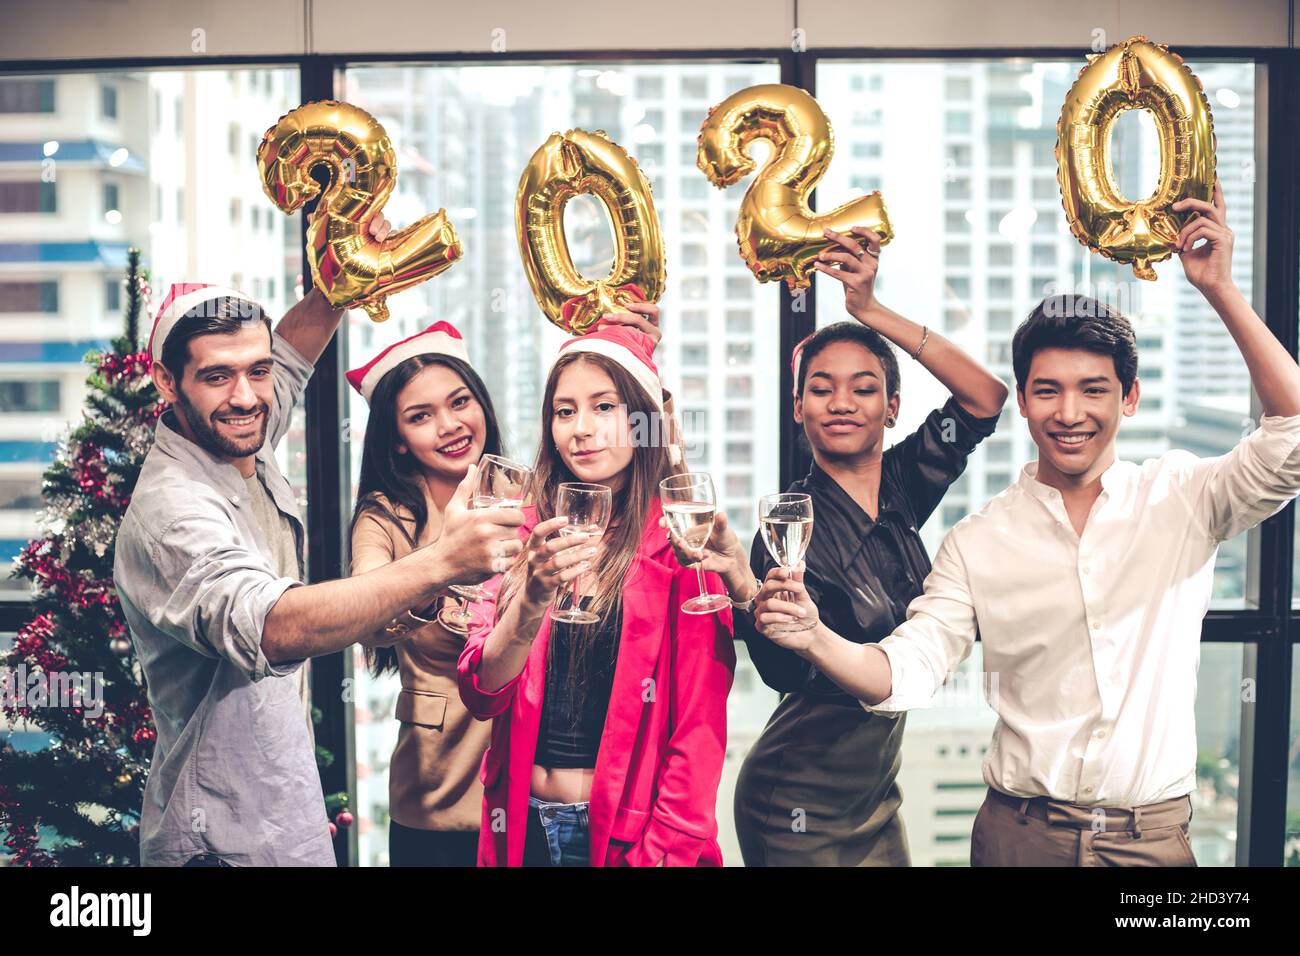 Group of office workers celebrating Christmas and New Year with clink glasses and drink prosecco, wine together while holding balloons in 2020 with ha Stock Photo